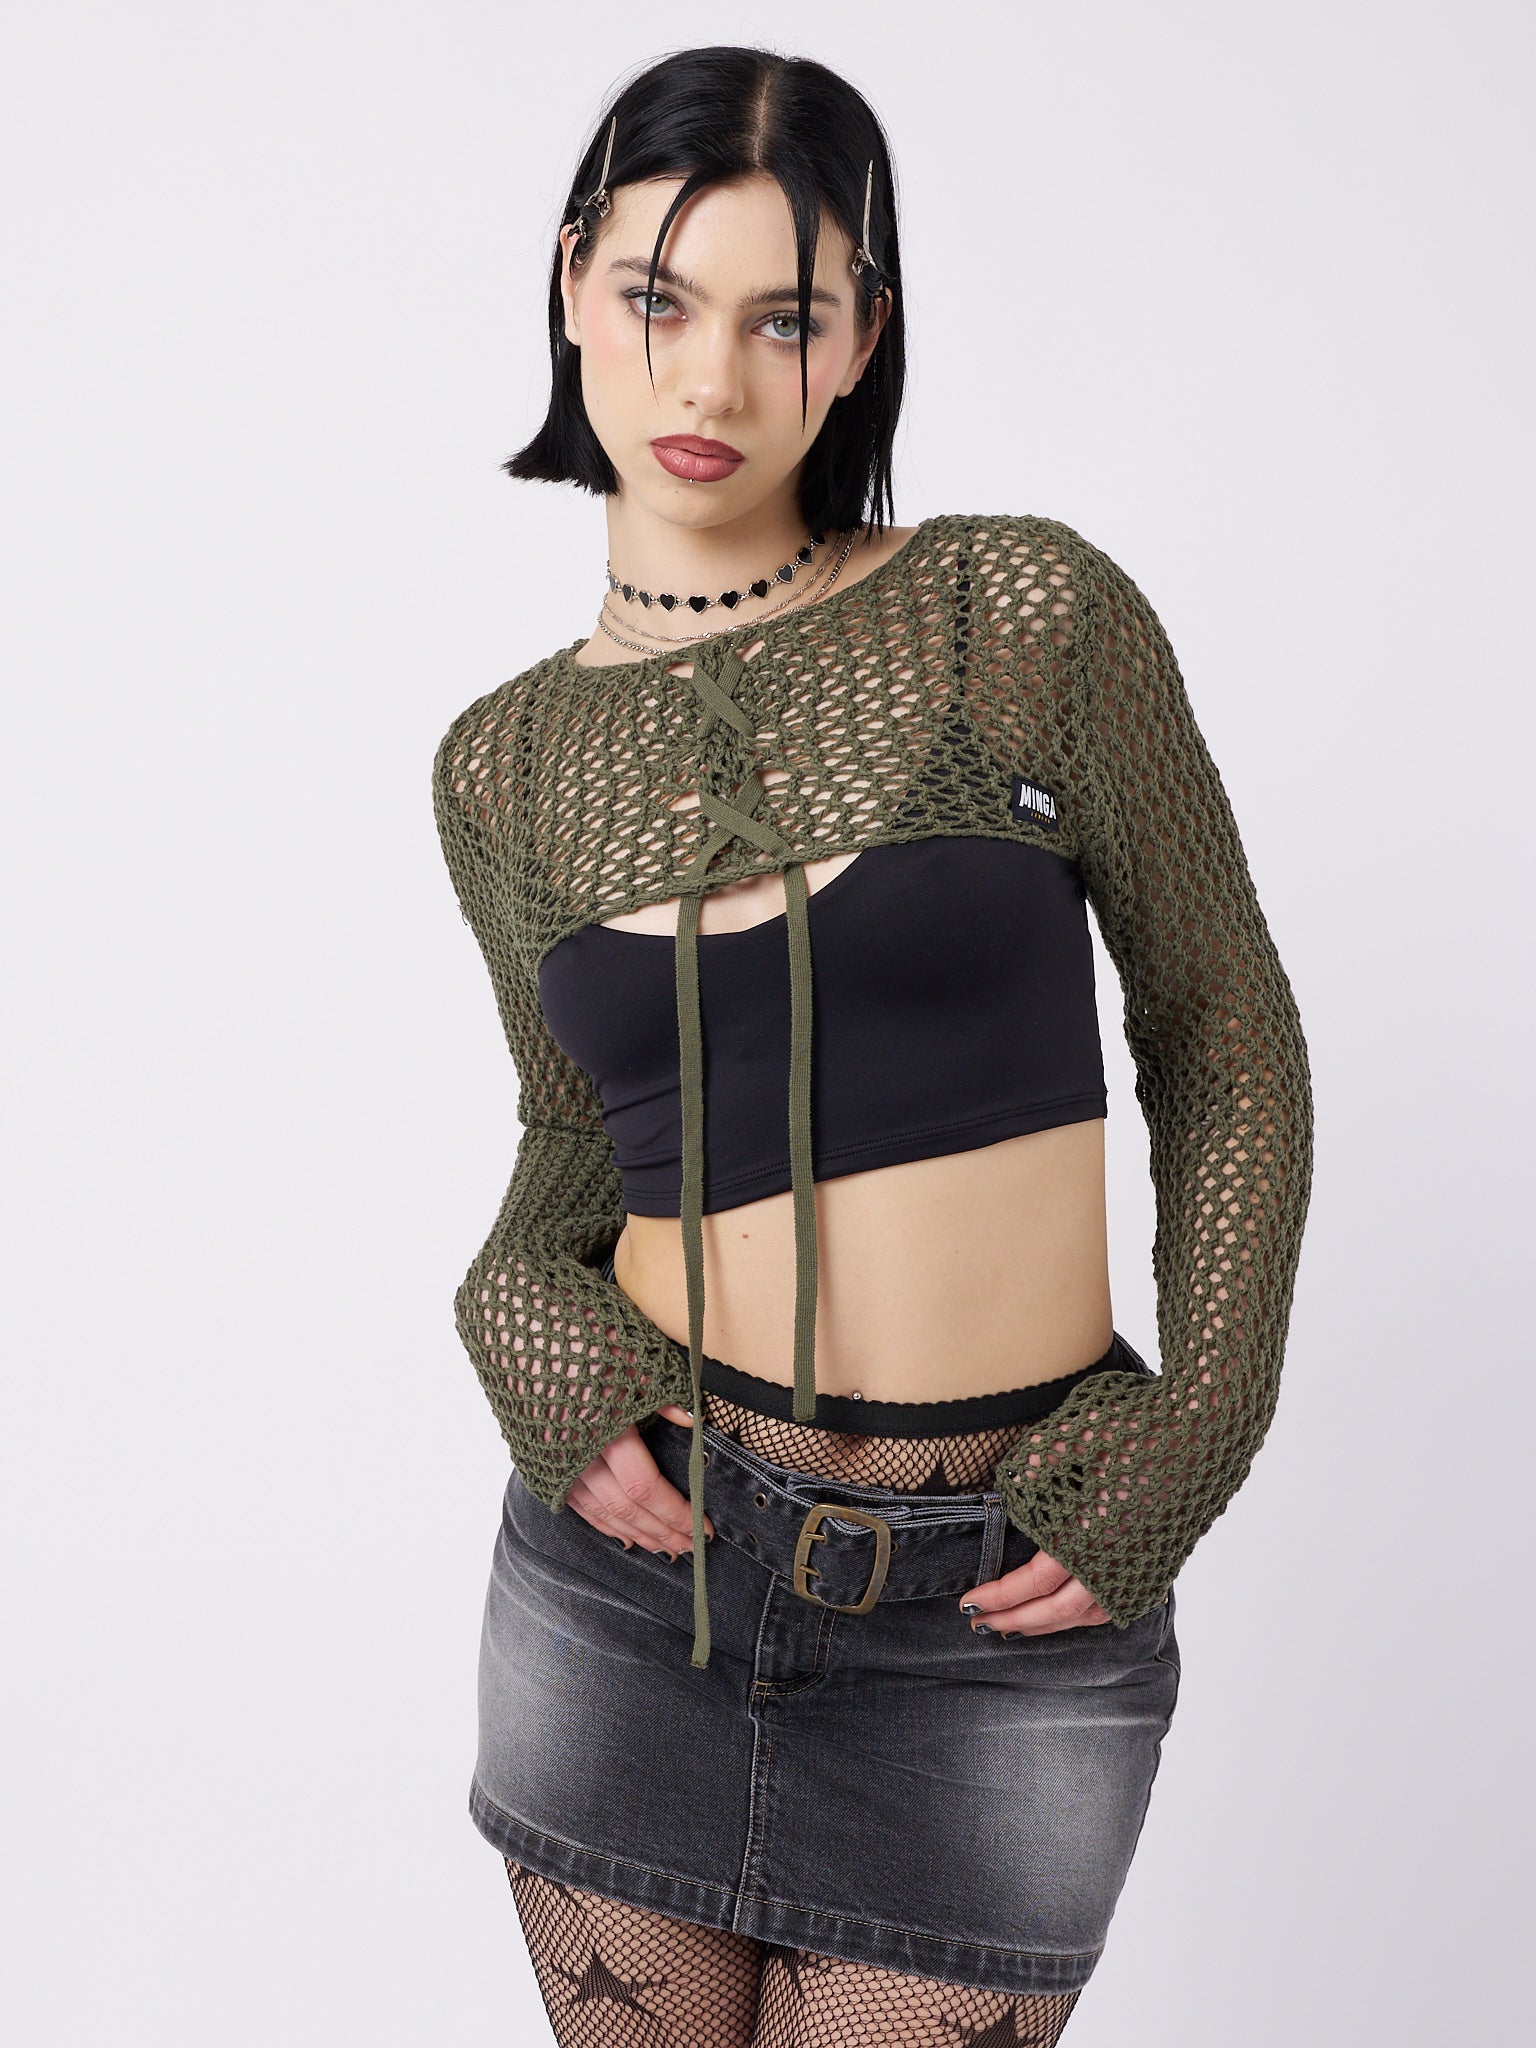 Stylish and versatile green knitted shrug with a trendy lace-up detail. Perfect for adding a touch of contemporary style to any outfit.